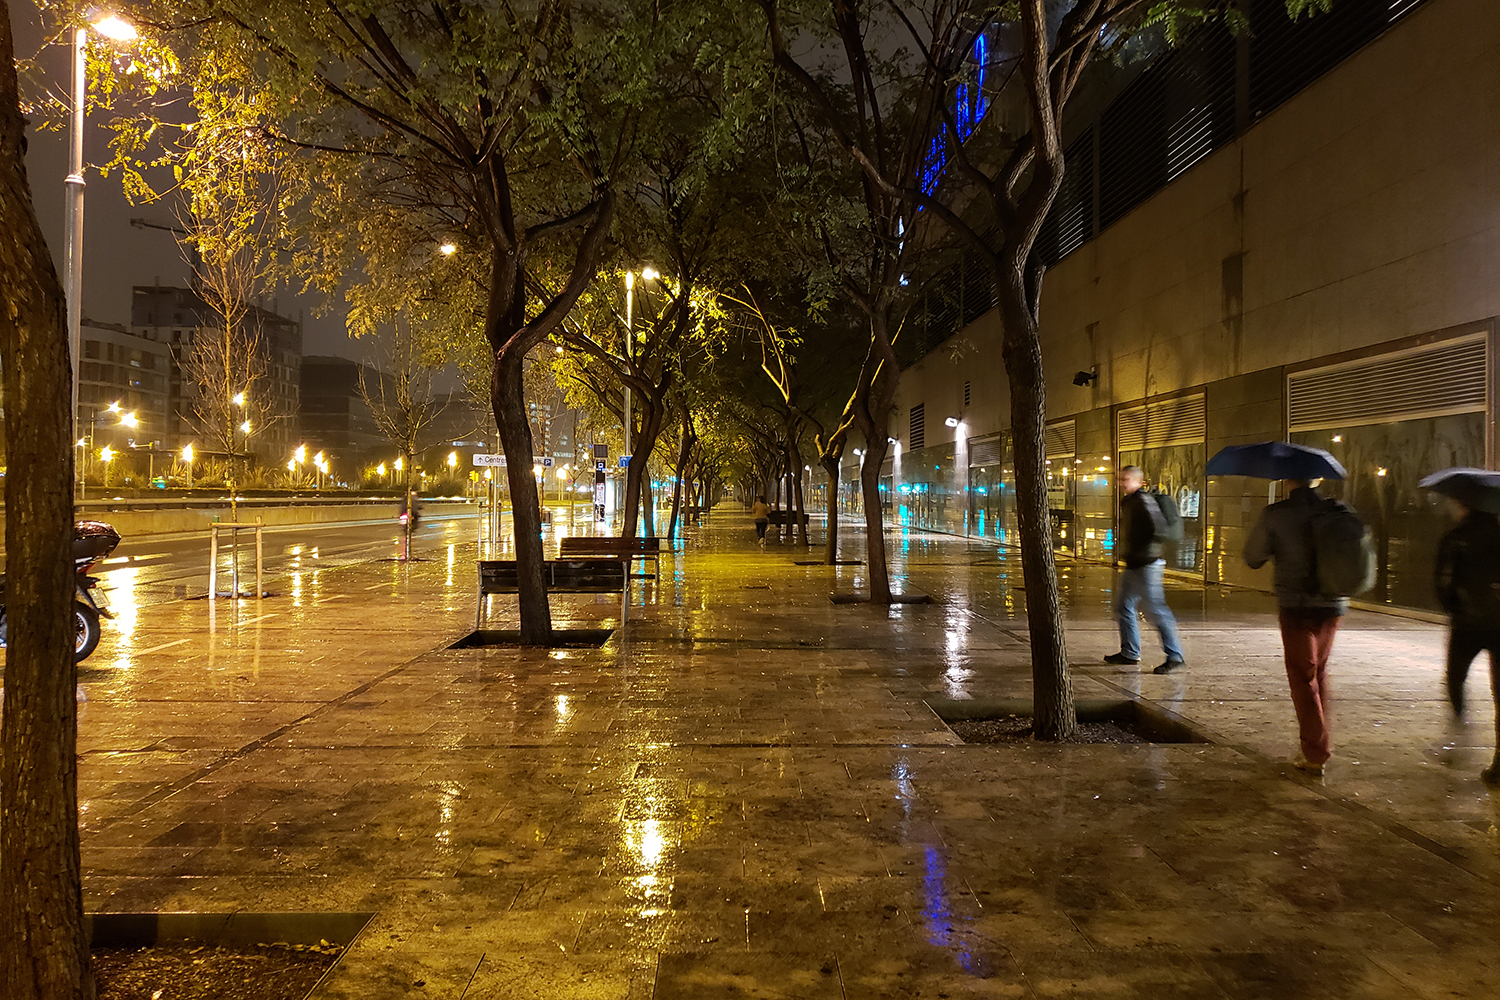 samsung galaxy s9 plus review camera samples rain and trees